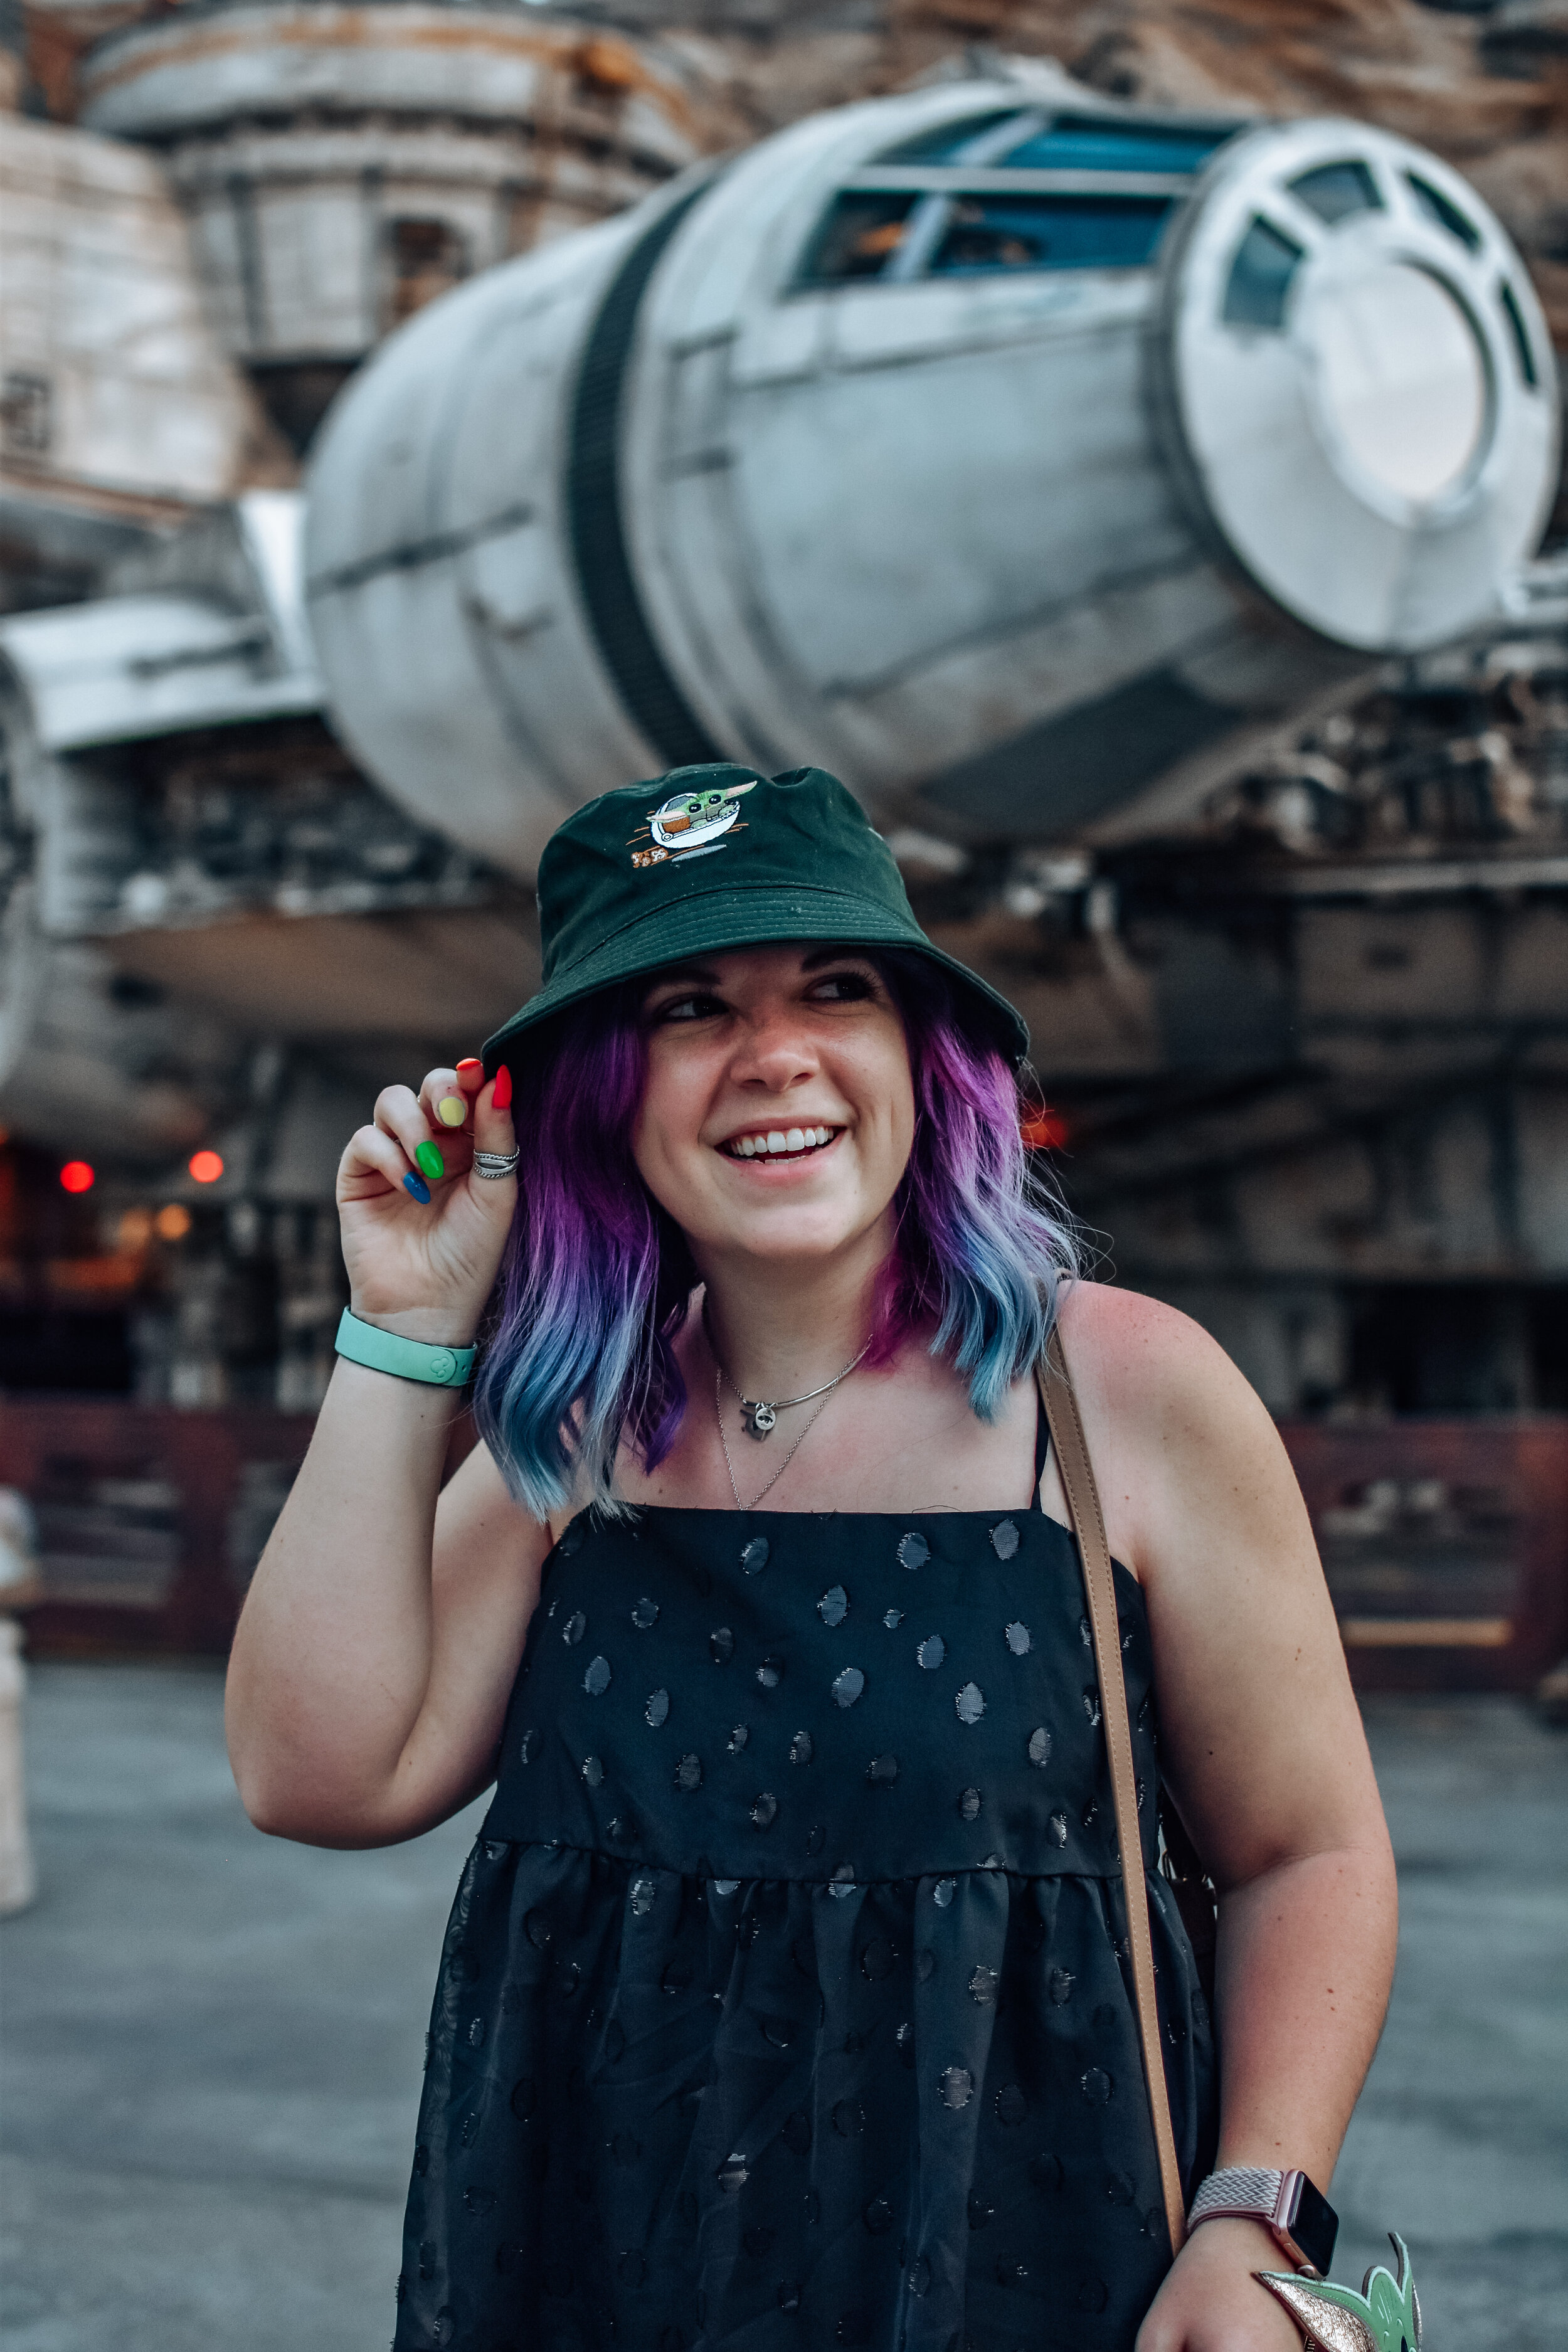 WHAT TO WEAR TO STAR WARS: GALAXY'S EDGE